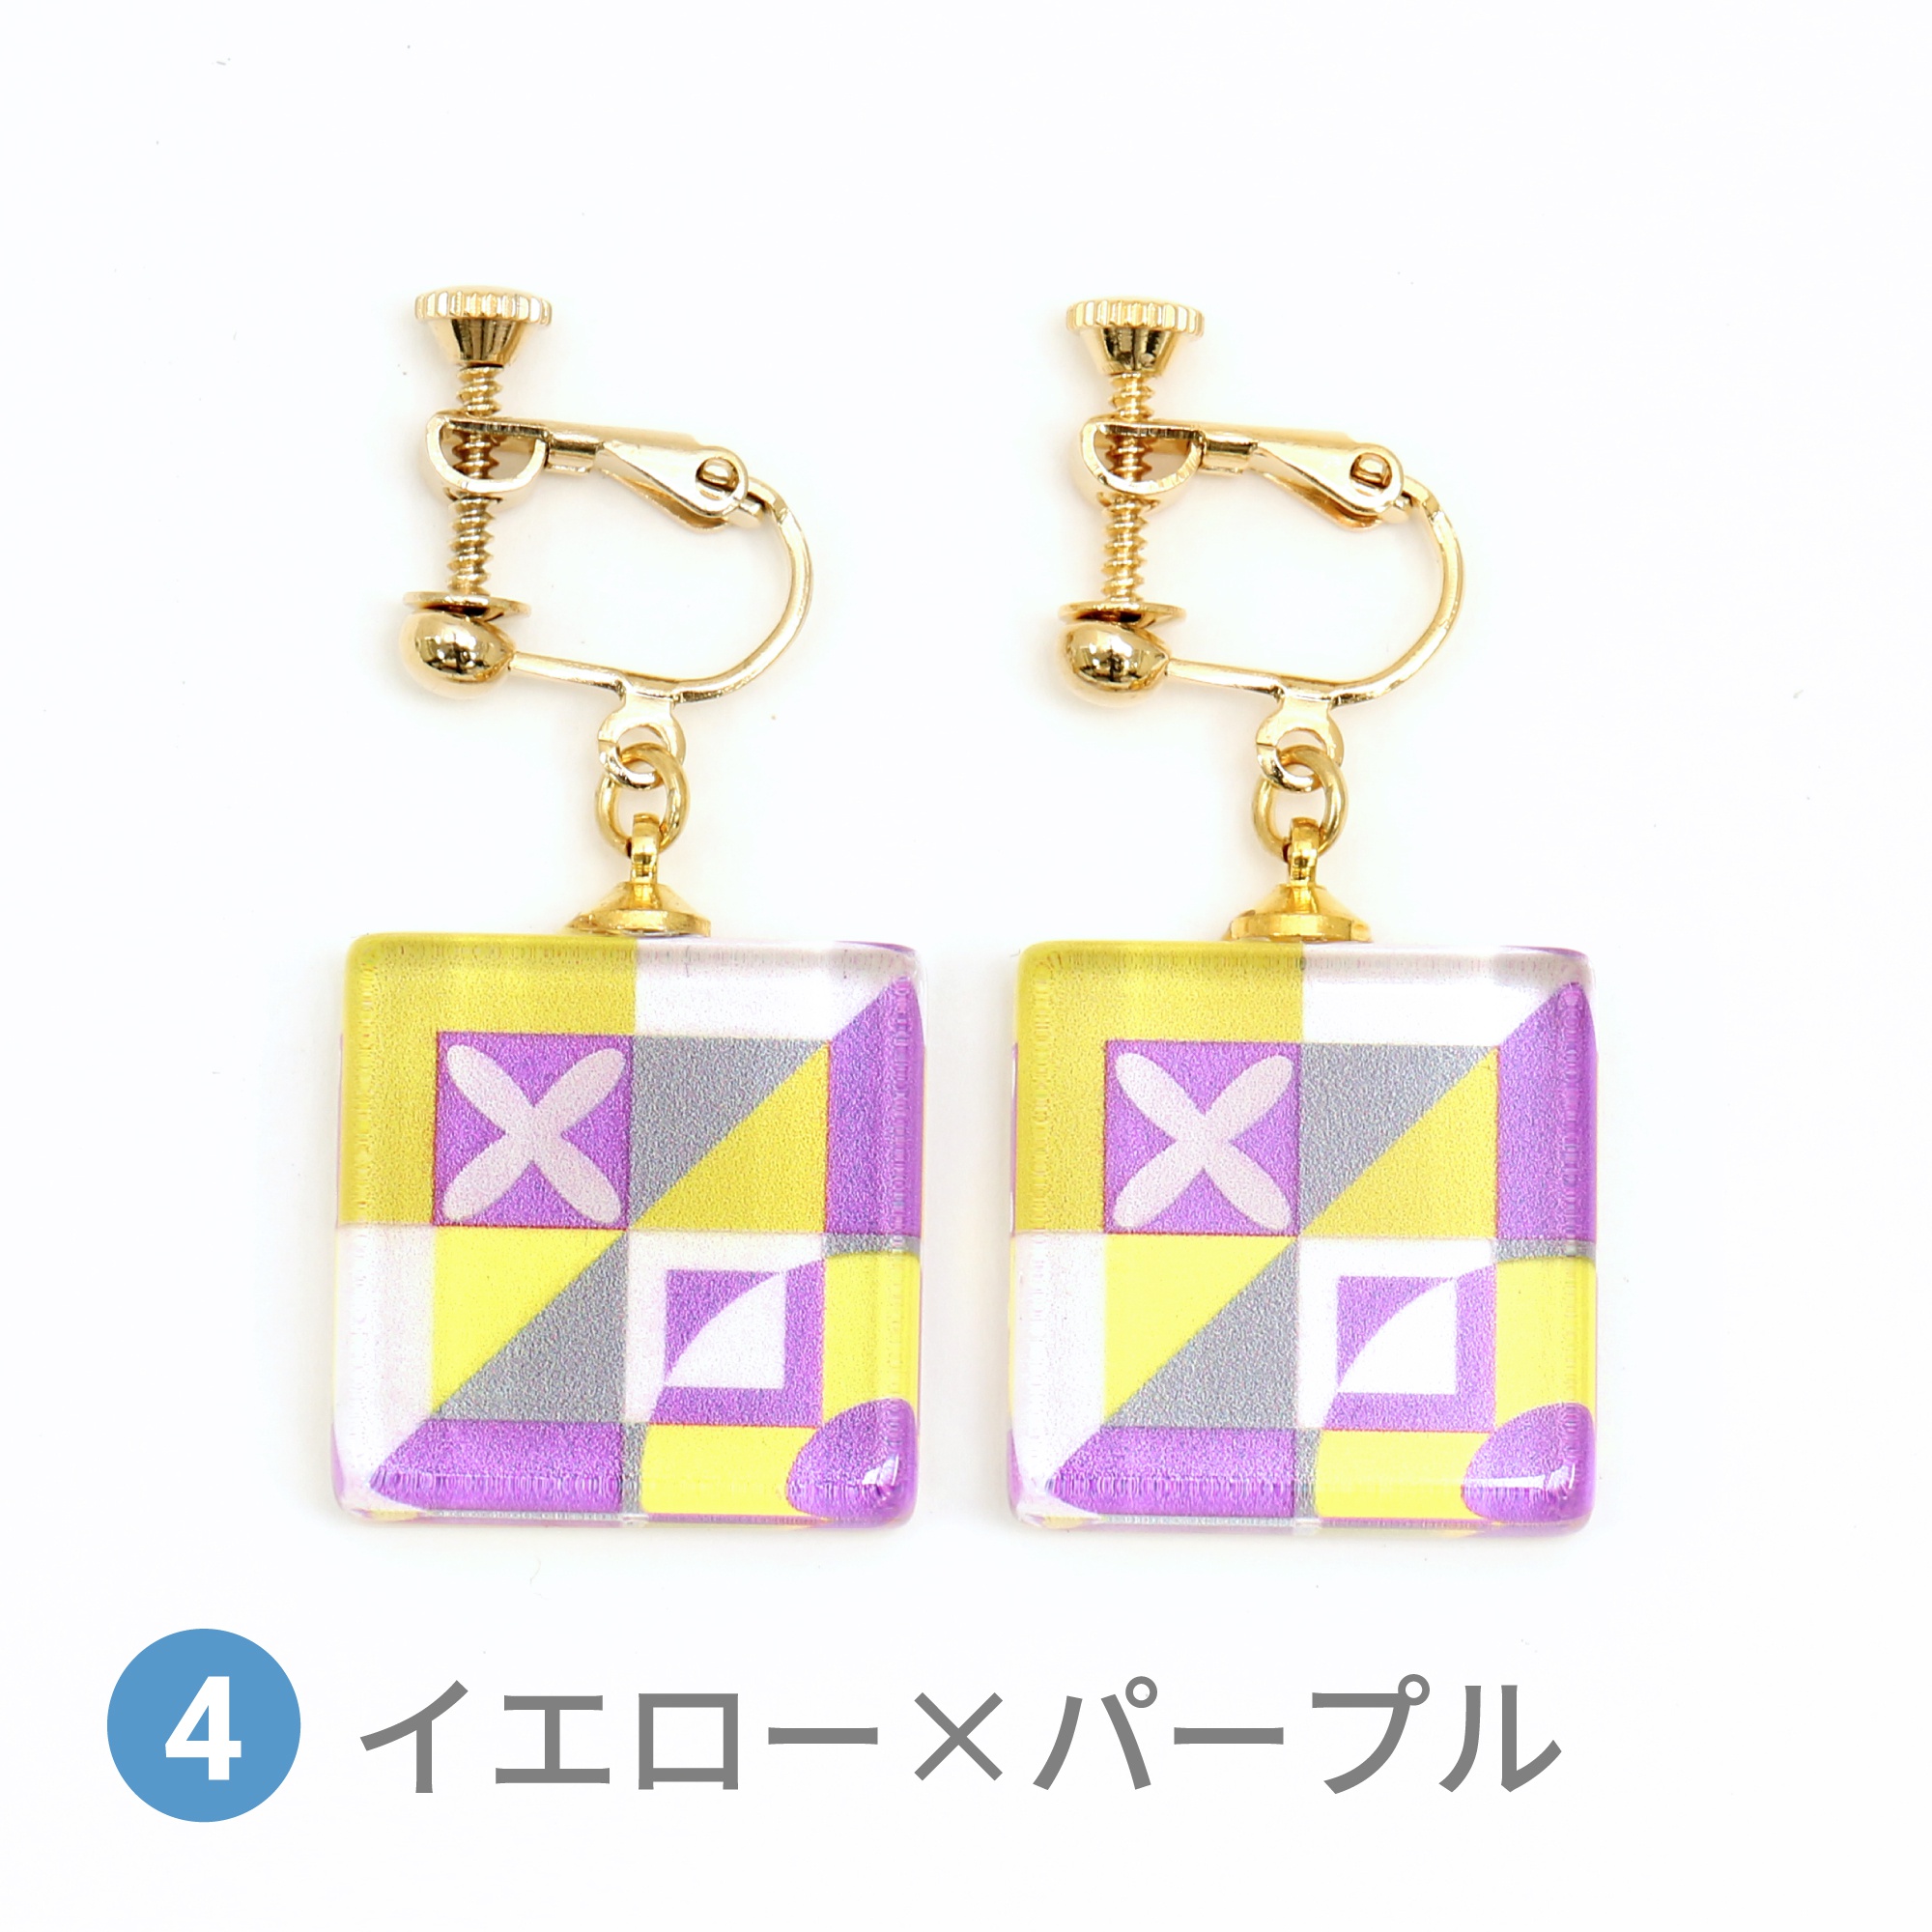 Glass accessories Earring GRID SYSTEM yellow&purple square shape